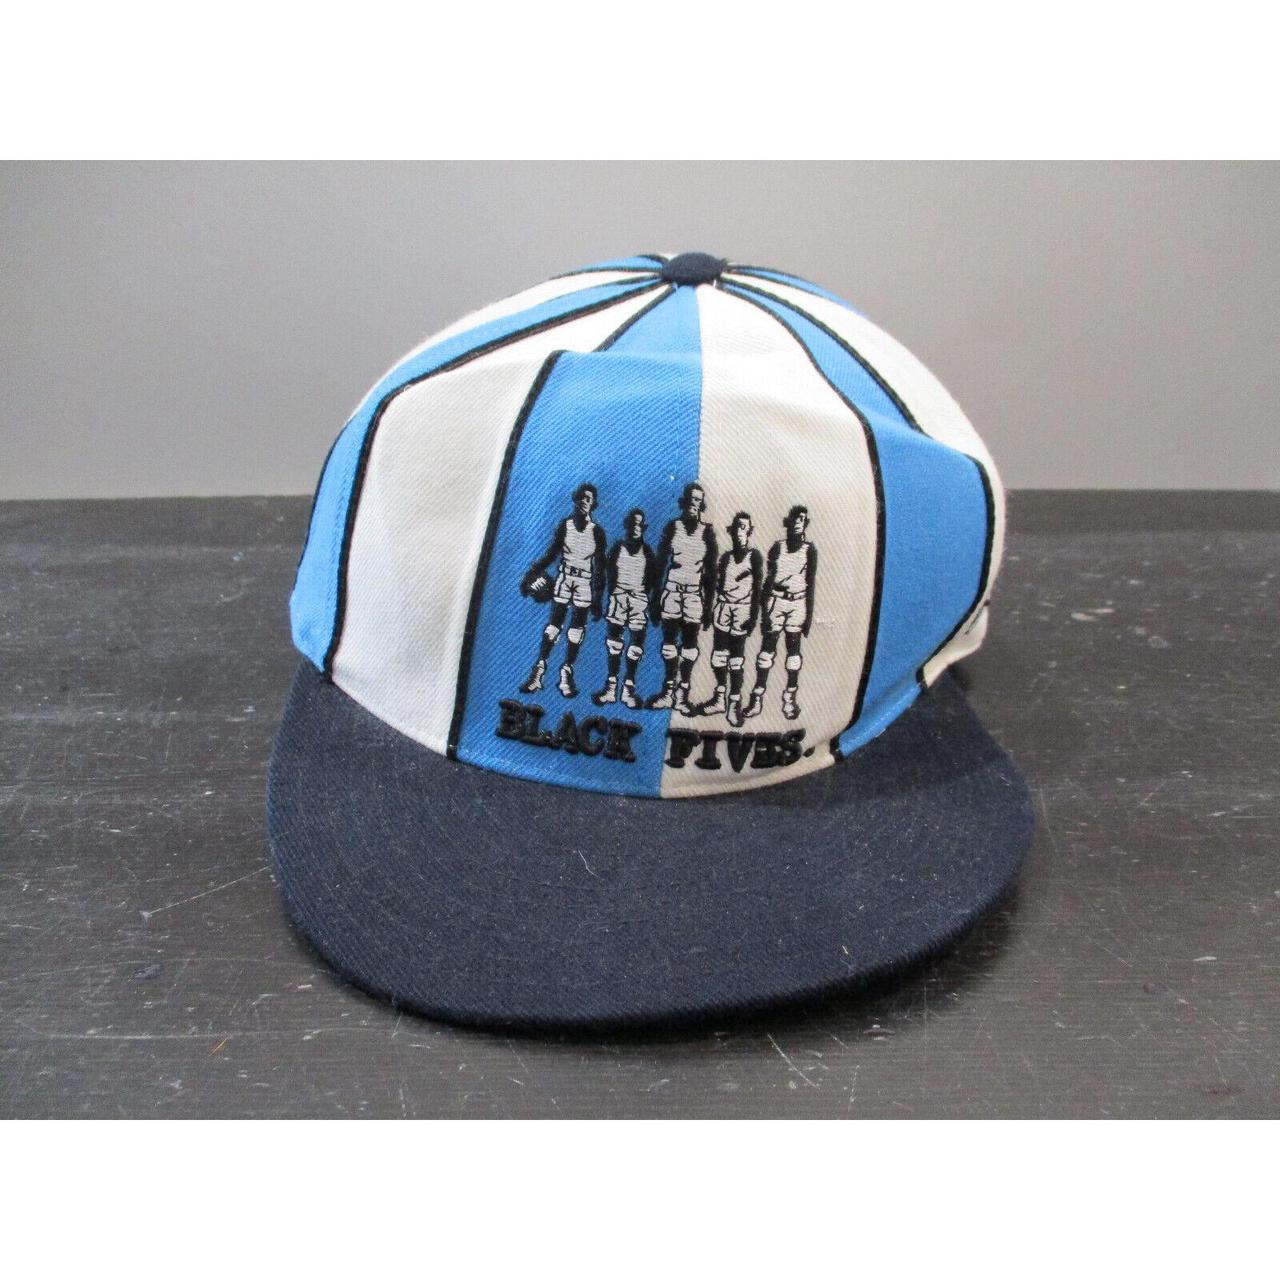 Needles Men's Blue and White Hat